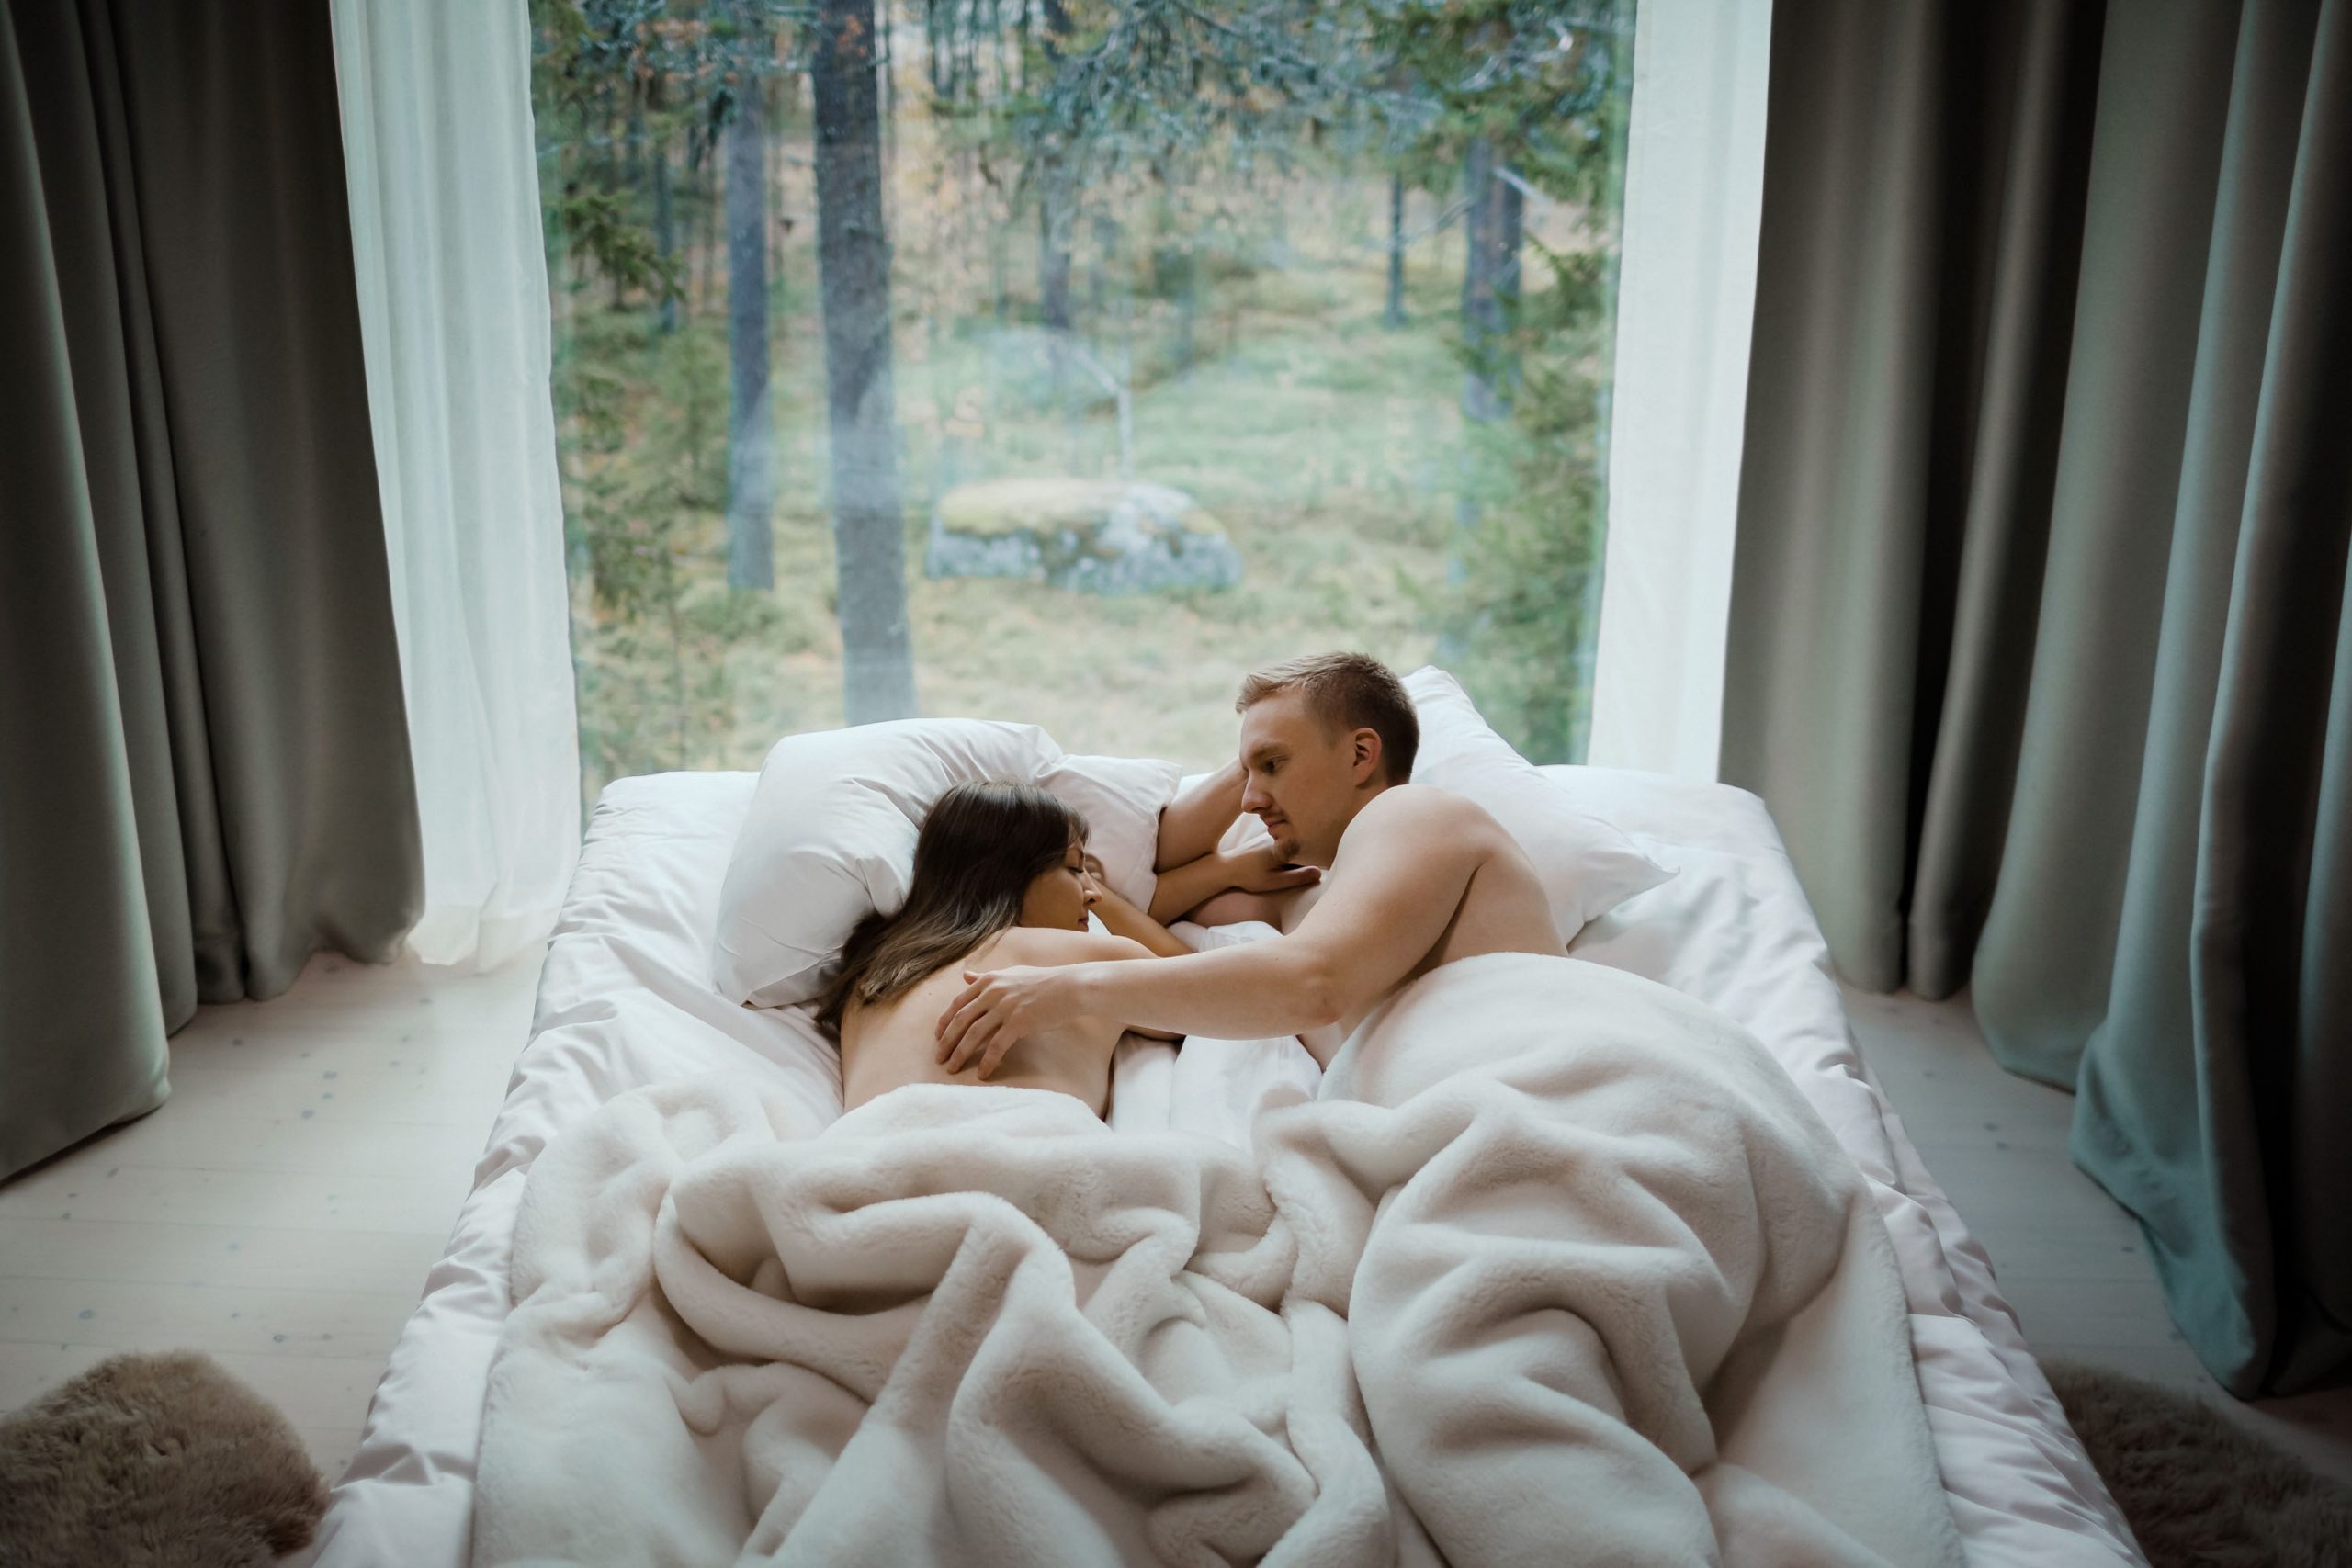 Couple enjoying the holiday in bed.